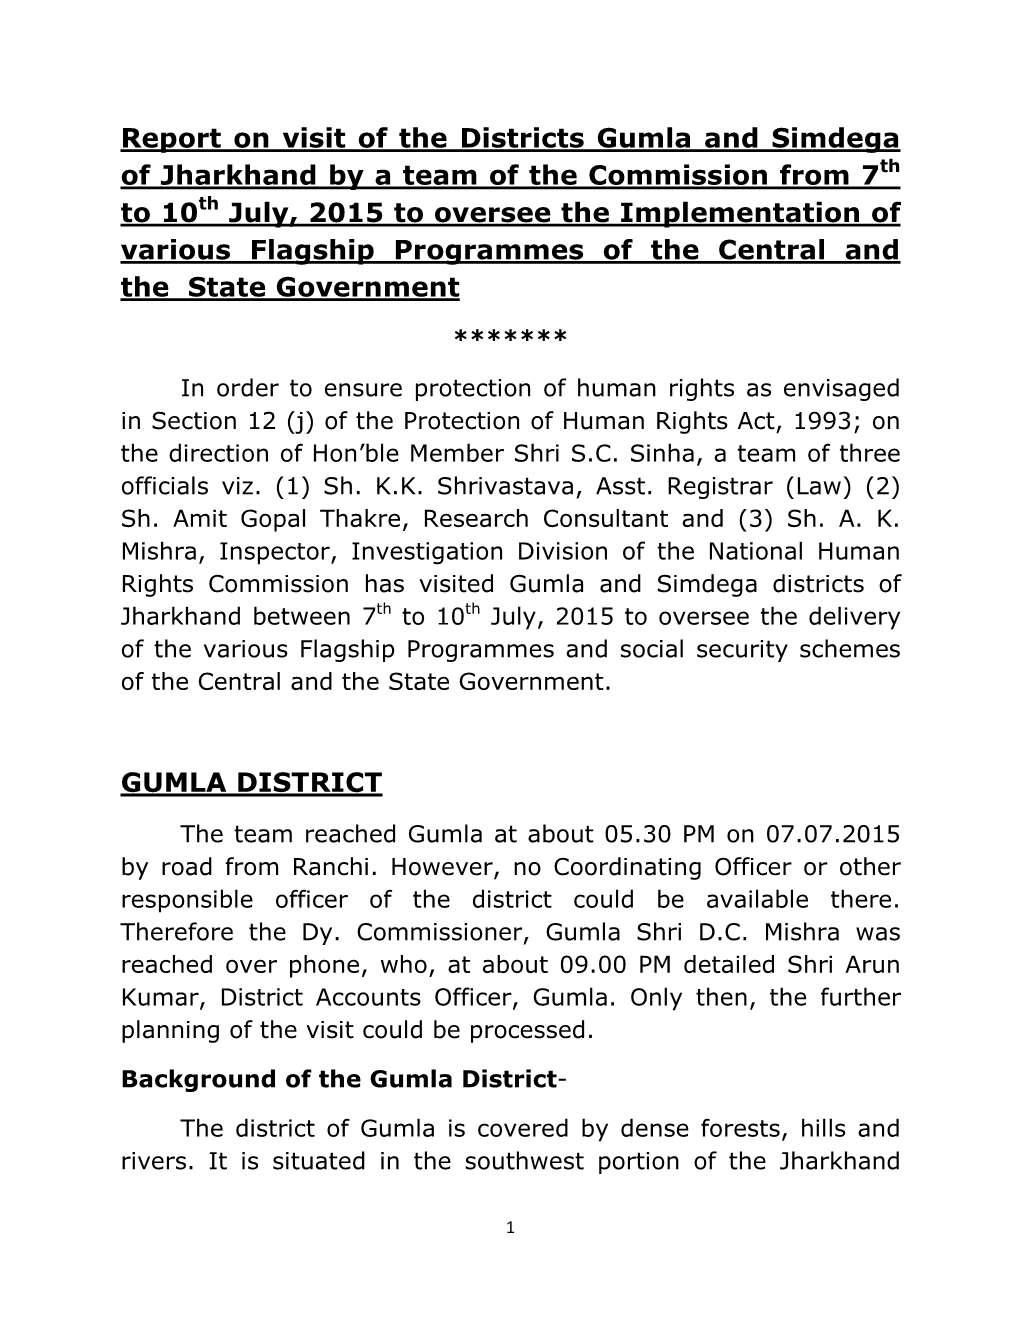 Report on Visit of the Districts Gumla and Simdega of Jharkhand by A